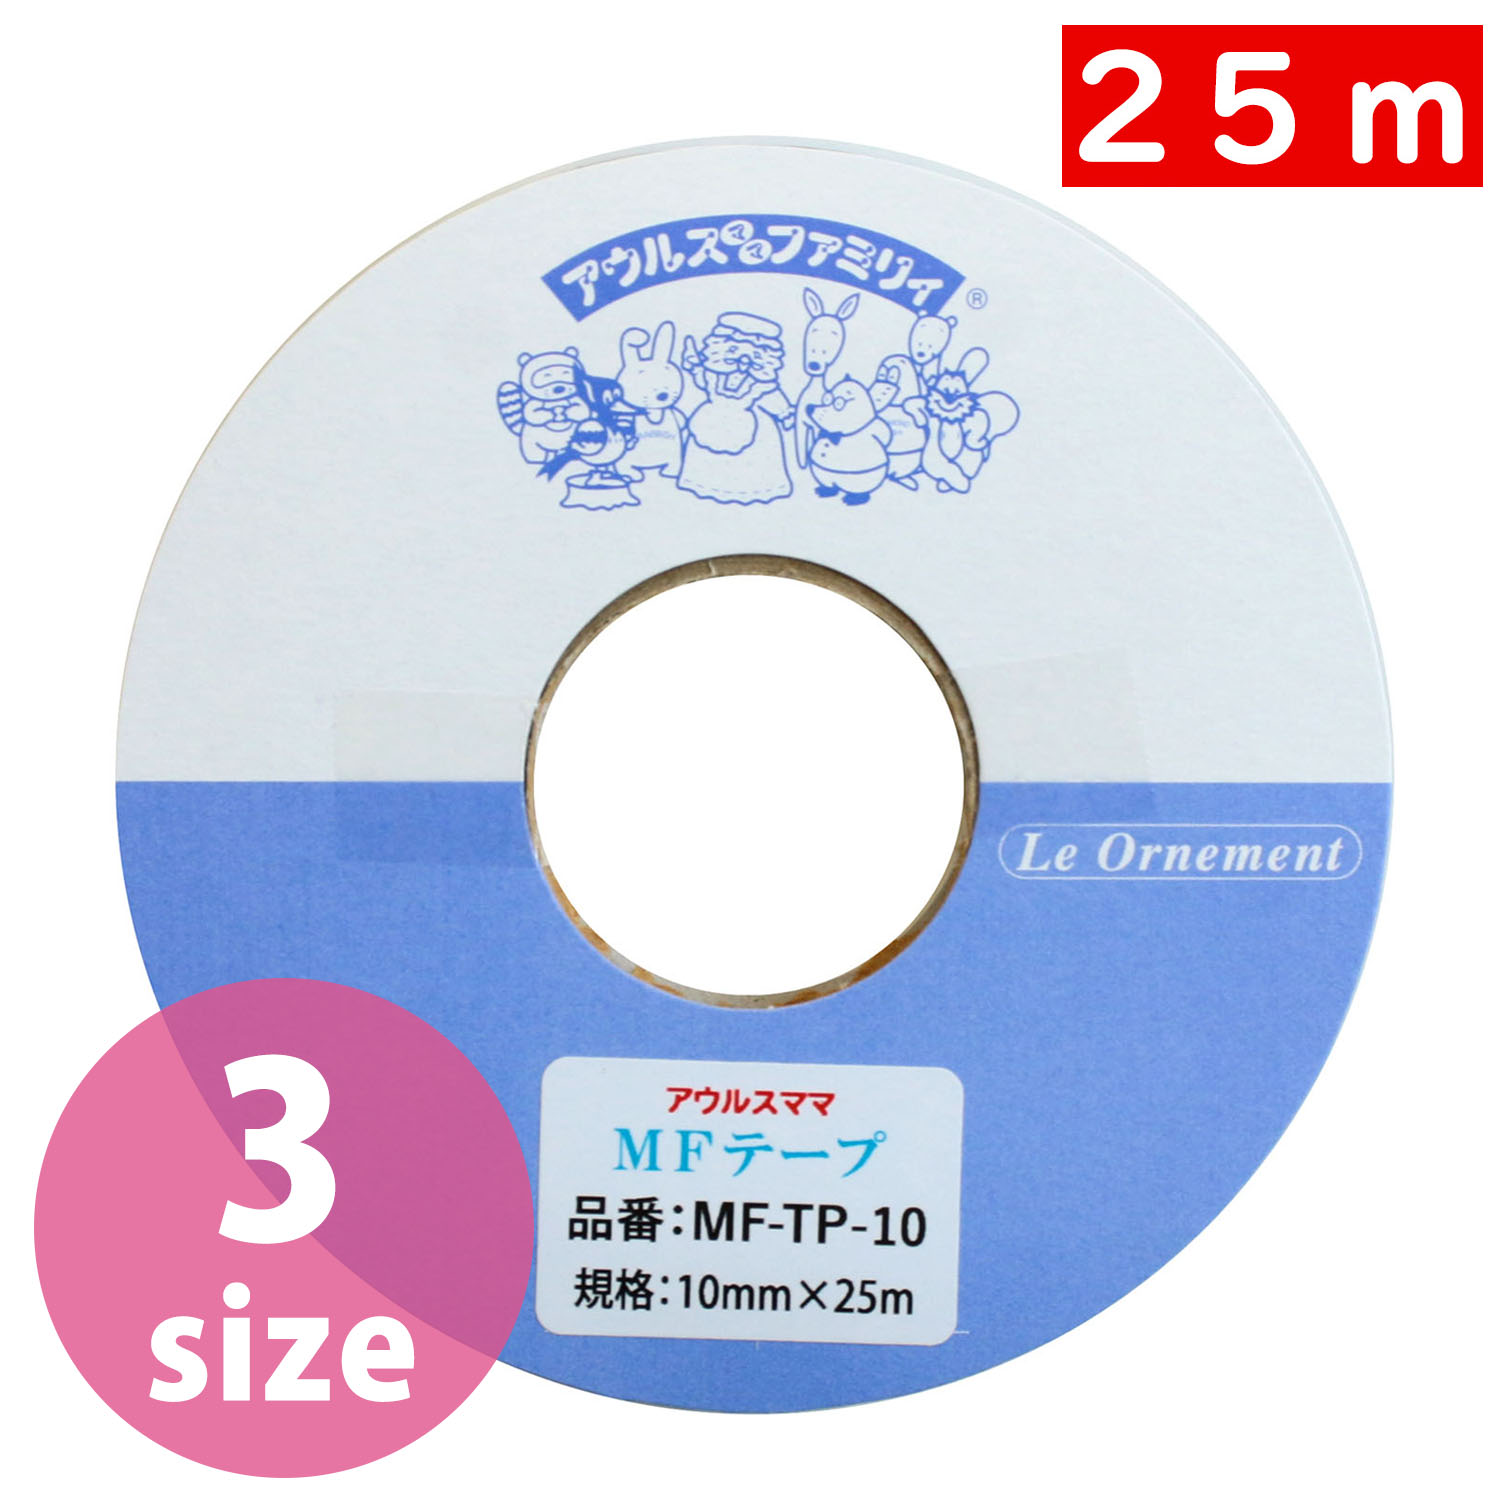 FMF MF Iron-on Double Sided Basting Tape 25m (roll)